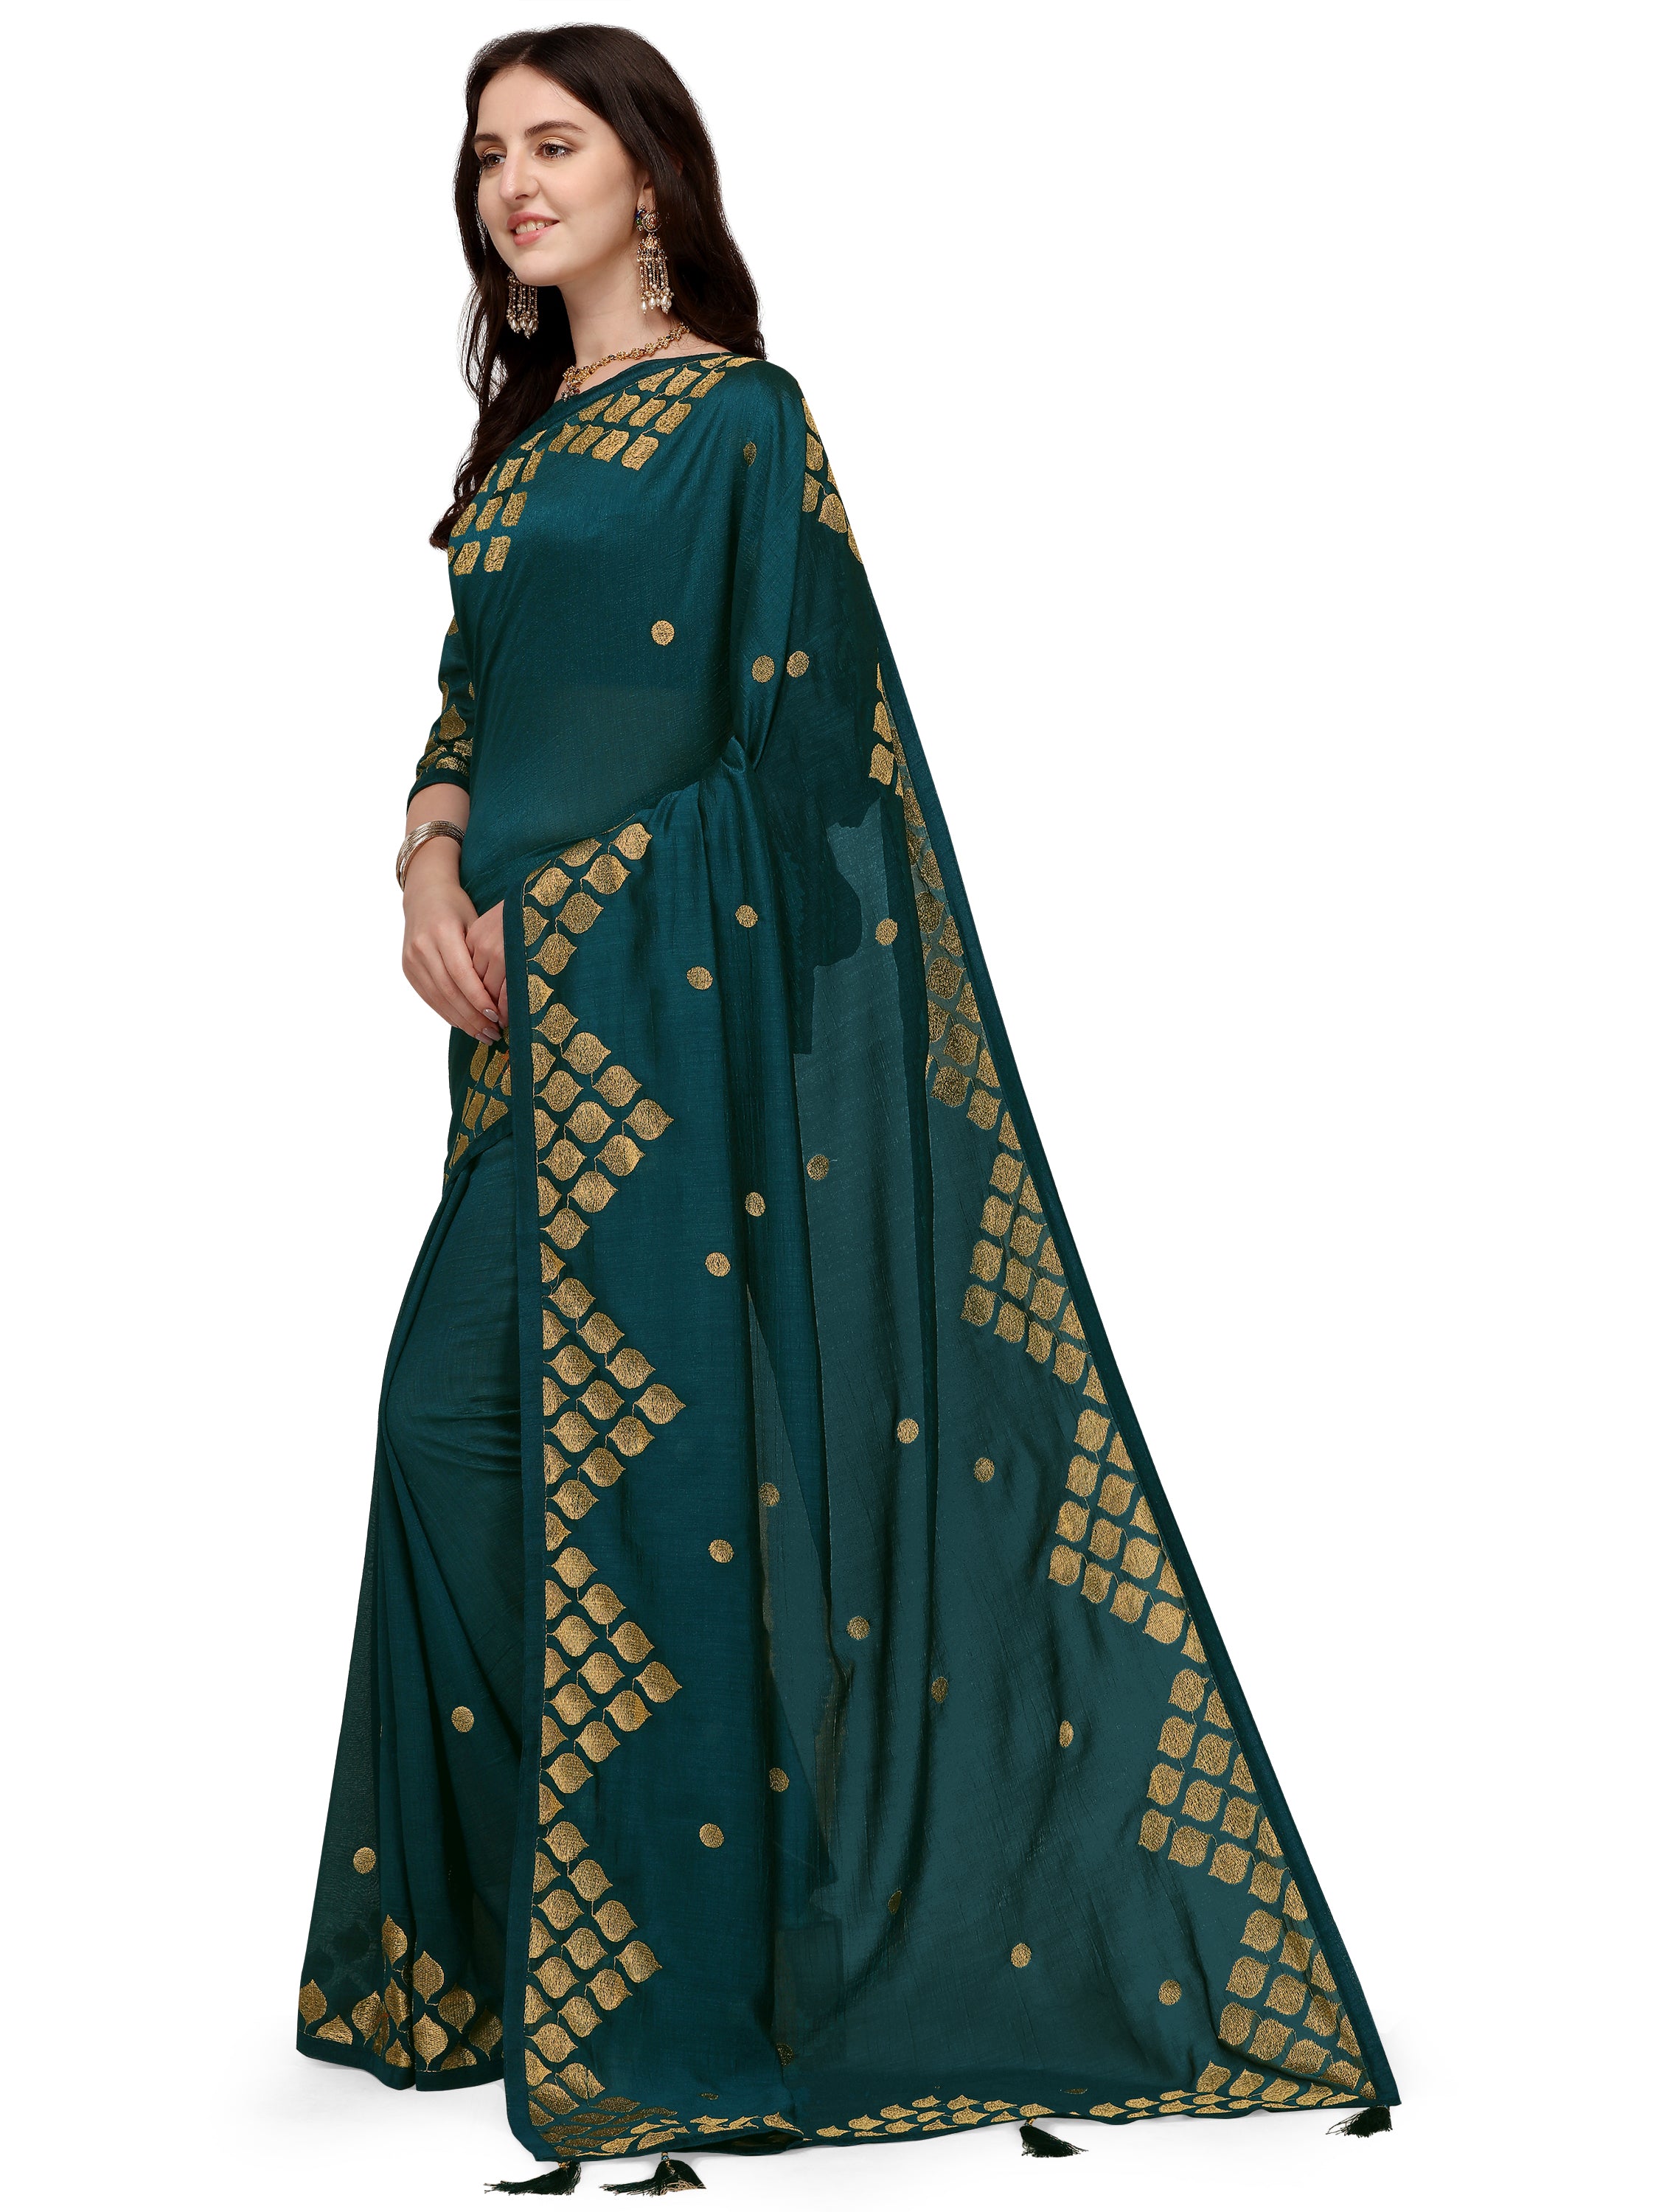 Women's Zari Embroided Paty Wear Traditional Silk Blend Saree With Blouse Piece (Teal) - NIMIDHYA